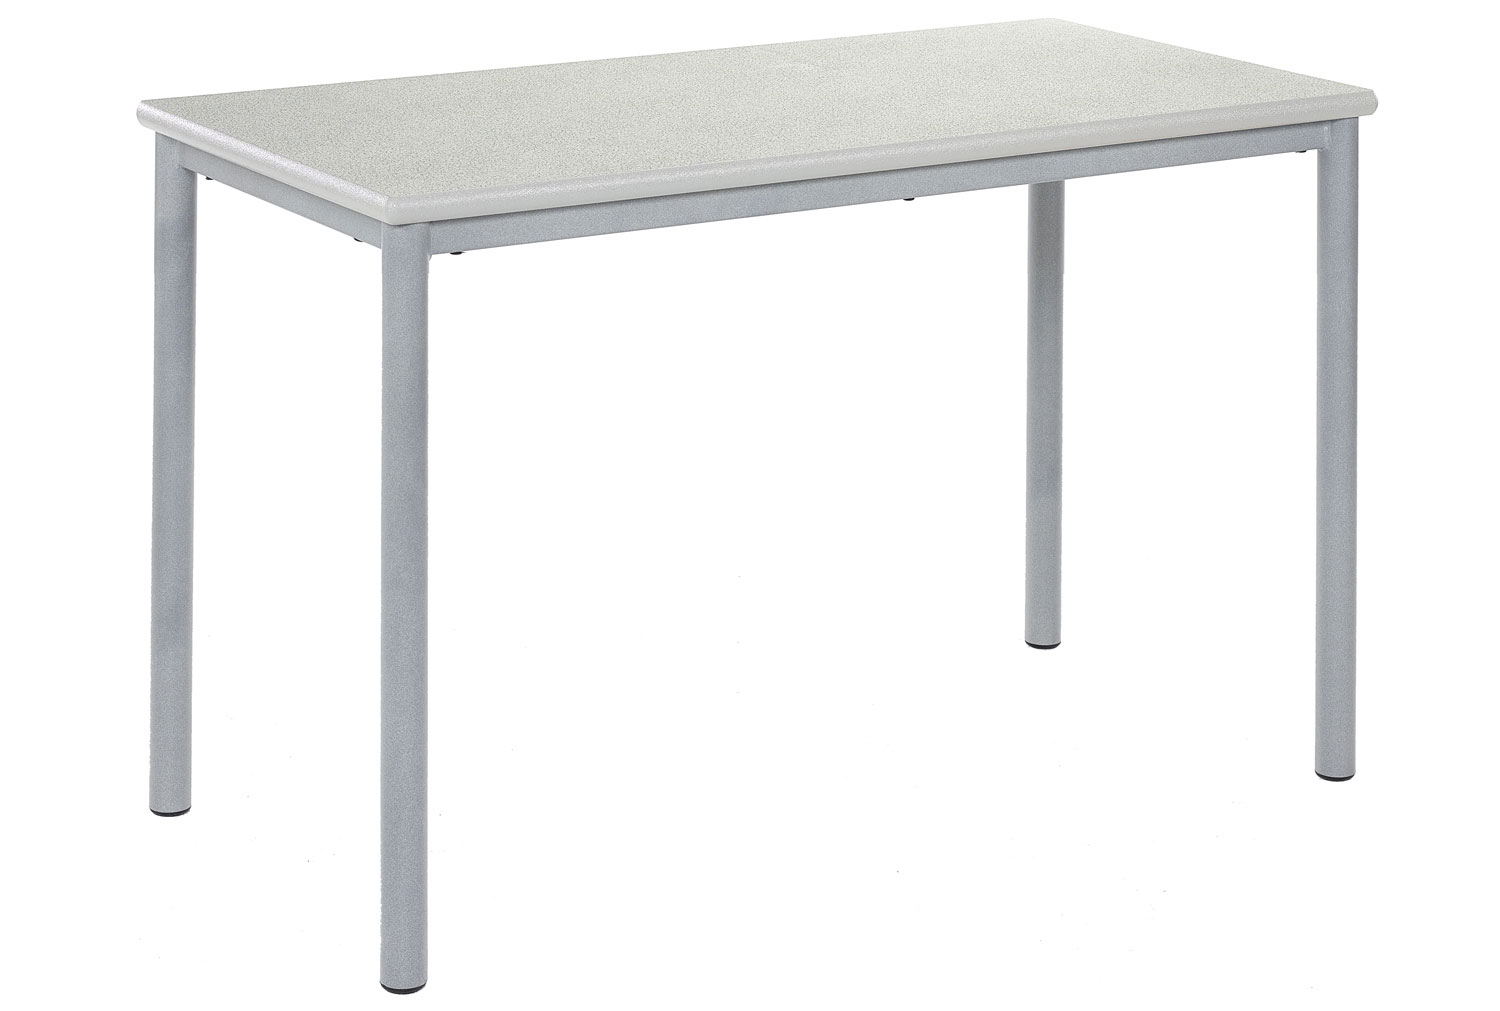 Qty 4 - Gather Rectangular Meeting Tables 120wx60d, Charcoal Frame, Summer Top, PU Charcoal Edge